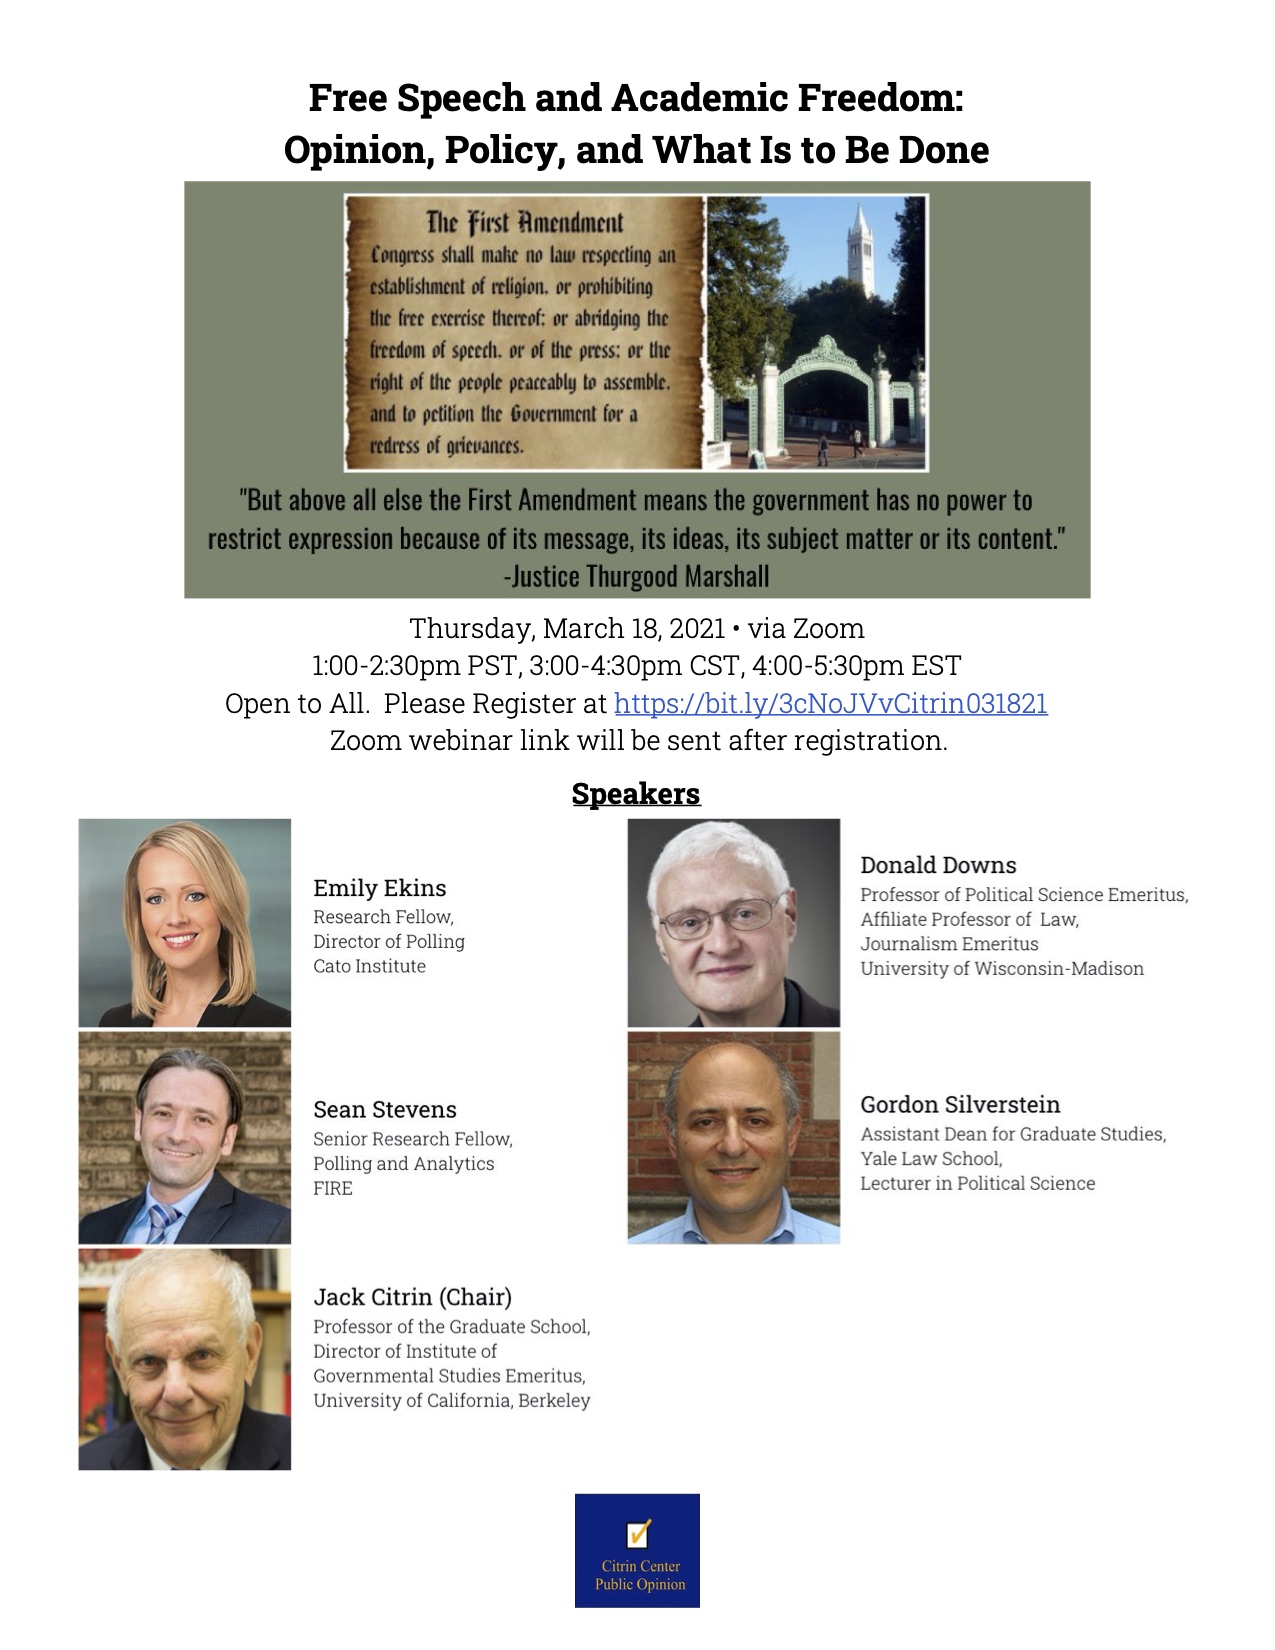 https://live-citrin-center-for-public-opinion-research.pantheon.berkeley.edu/wp-content/uploads/2021/02/March-18-Event-Flyer_-Free-Speech-and-Academic-Freedom_-Opinion-Policy-and-What-Is-to-Be-Done-1.jpg